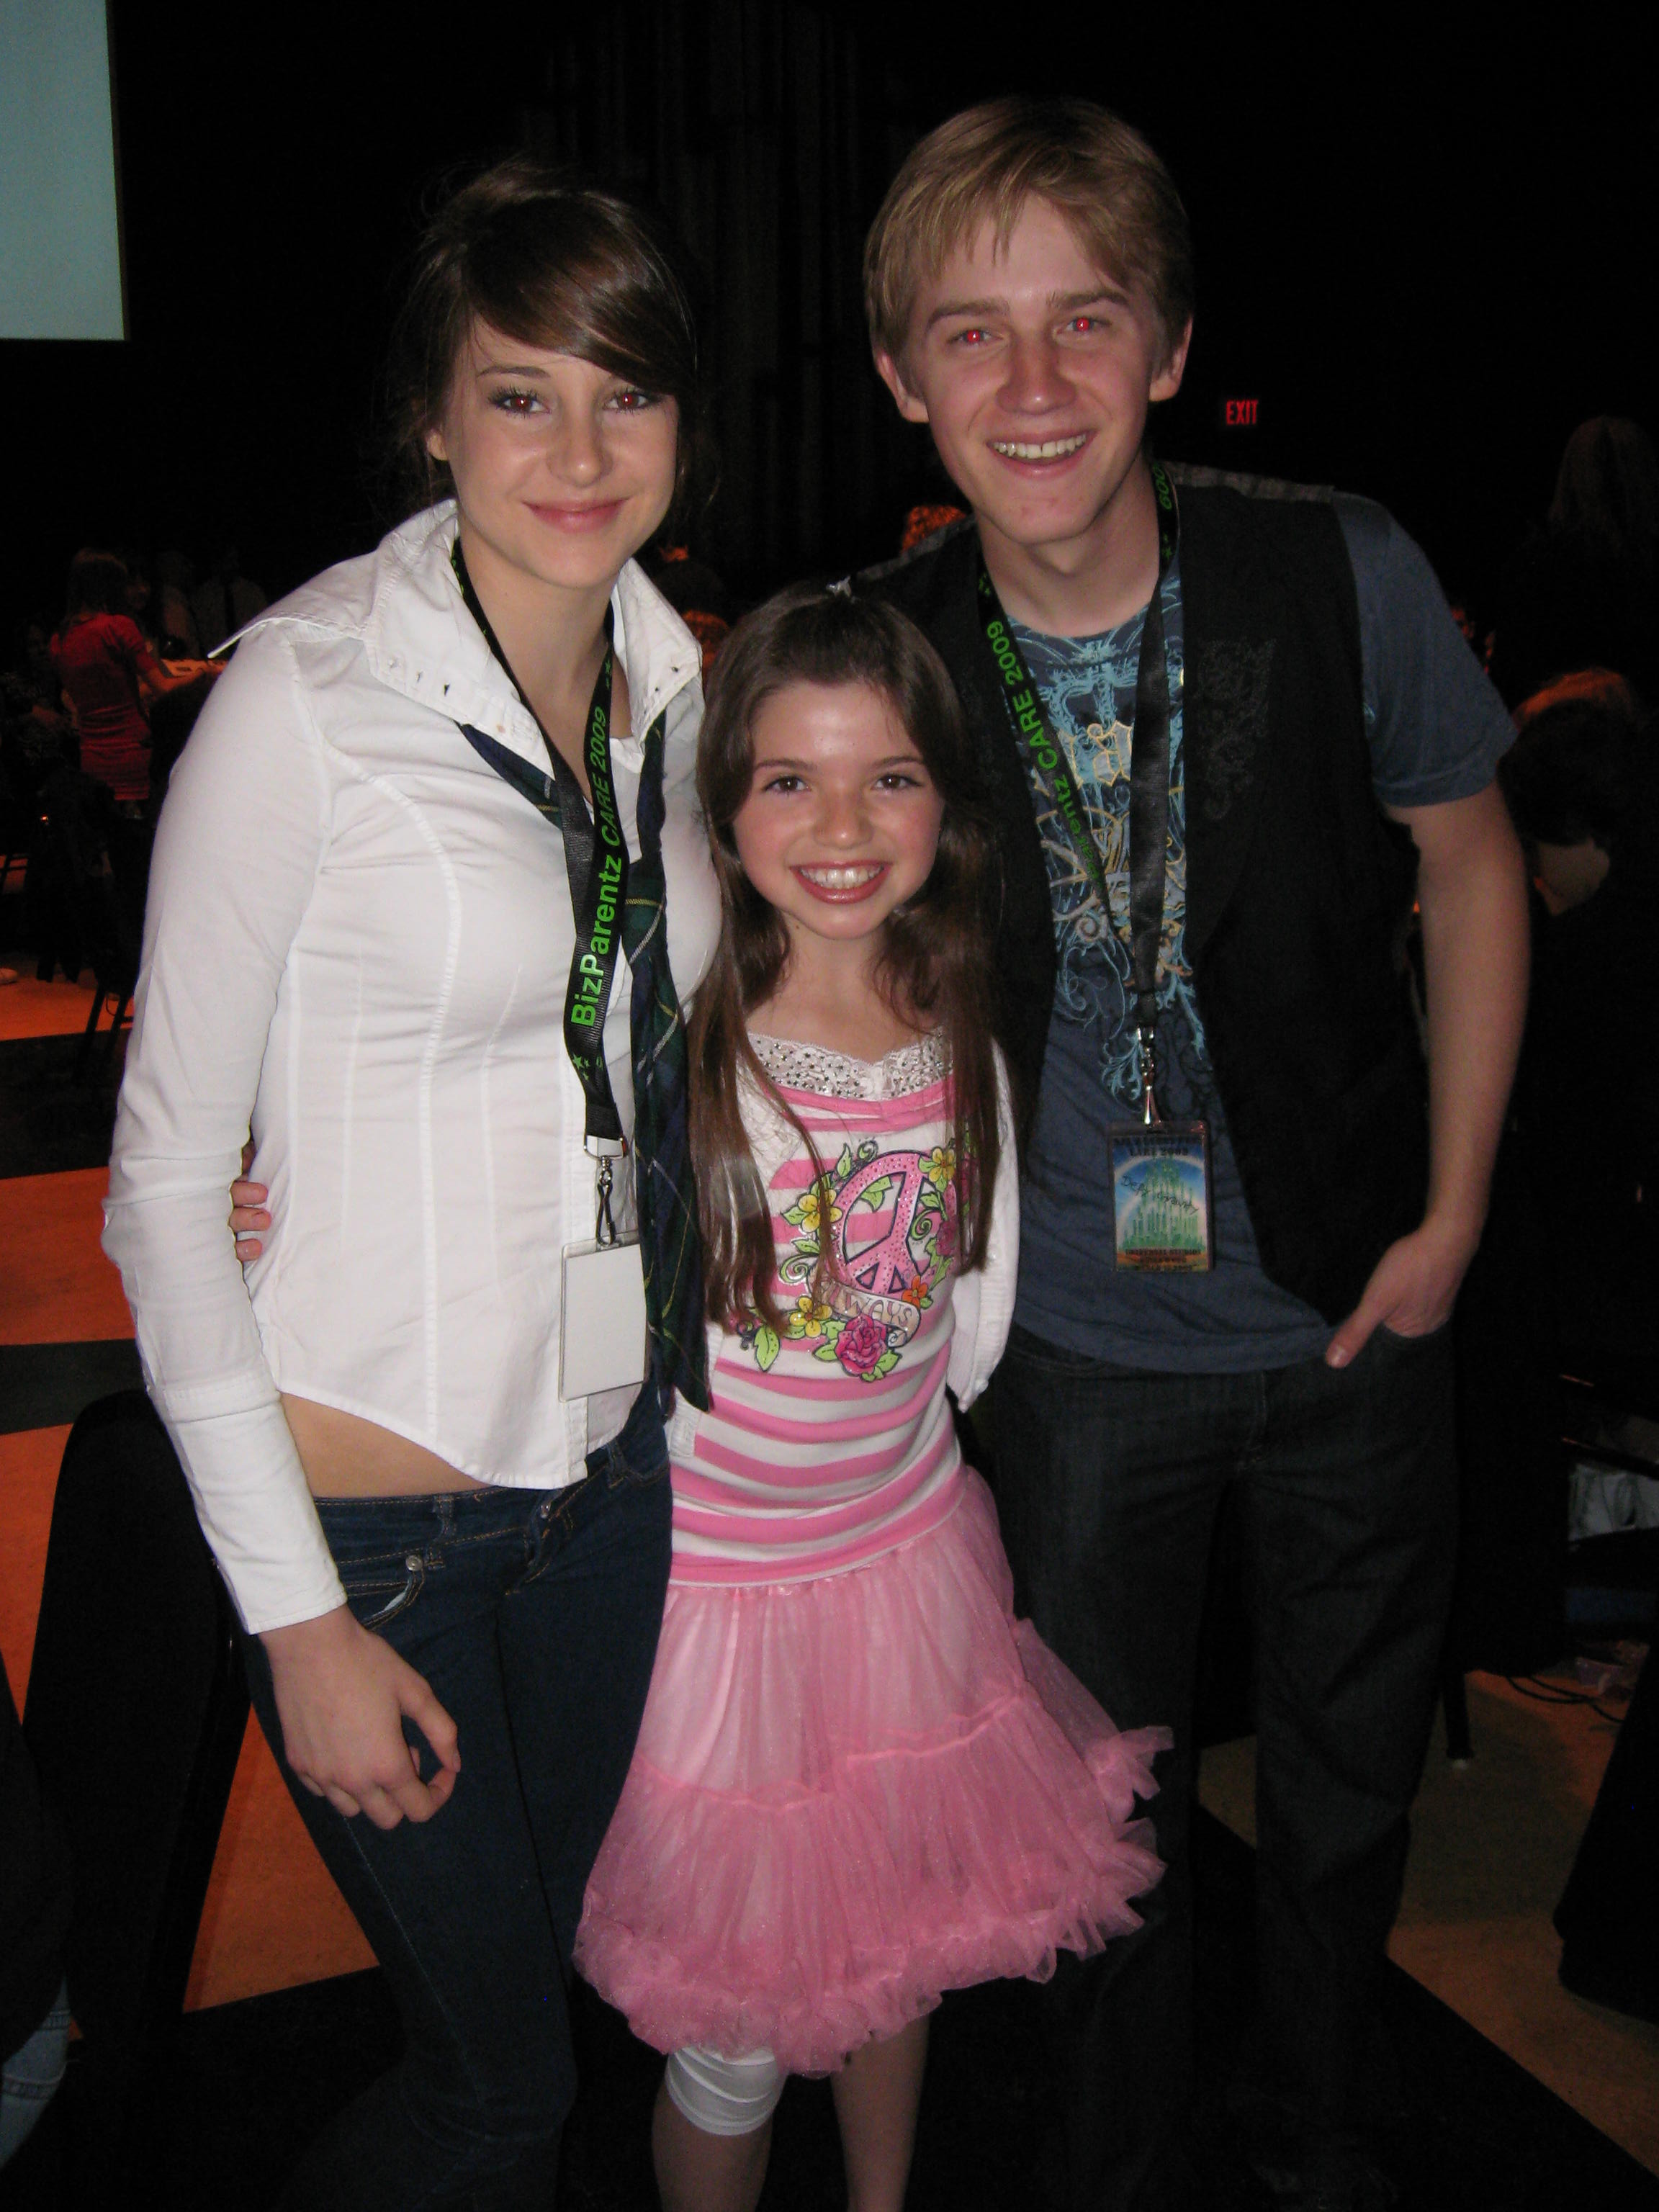 Jadin with Shailene Woodley and Jason Dolley at the CARE AWARDS.